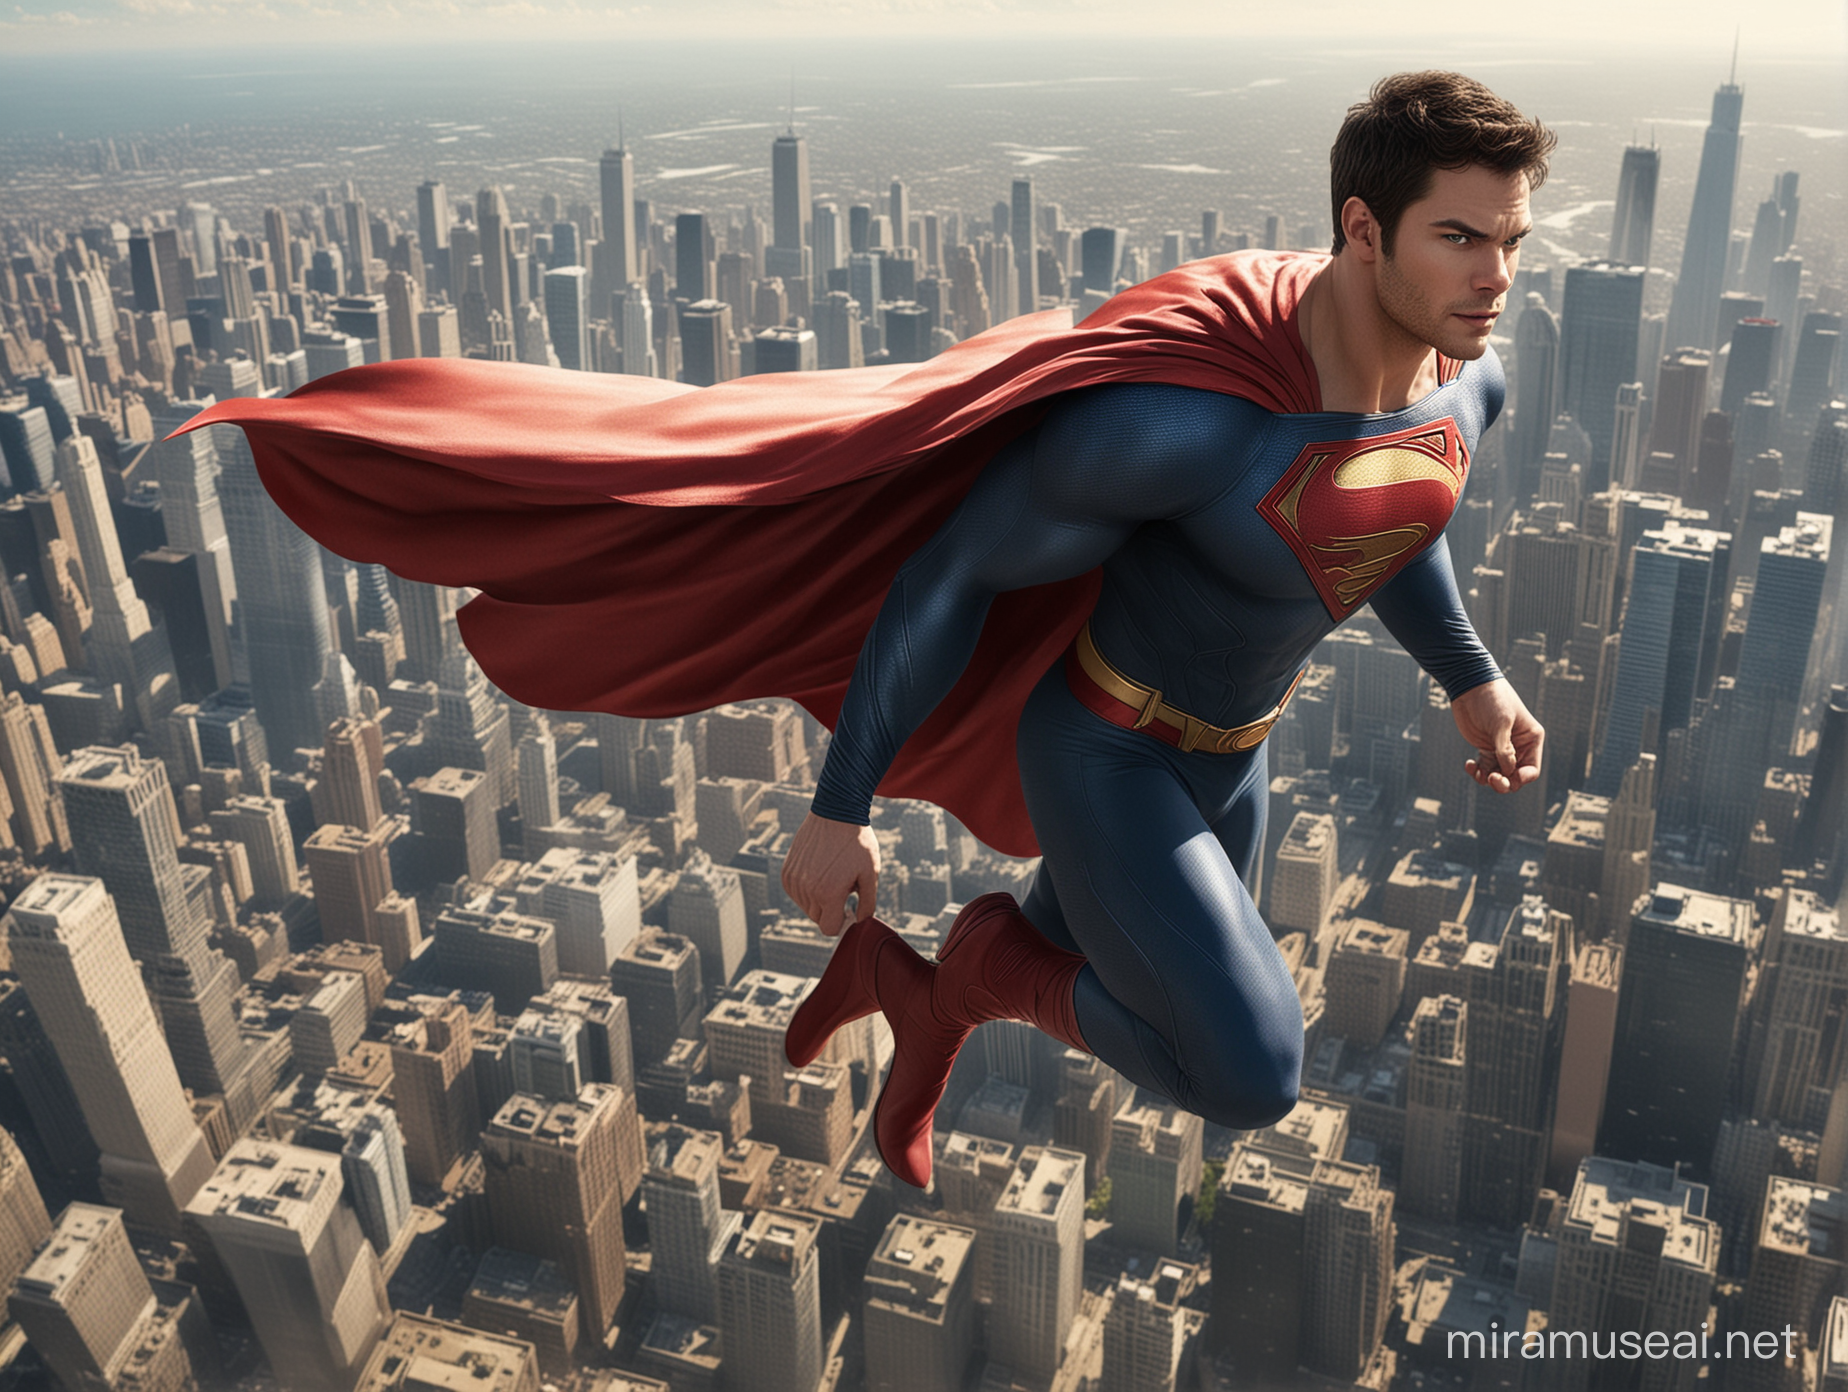 Kellan Lutz as New 52 Superman Soaring Over Chicago on a Sunny Day